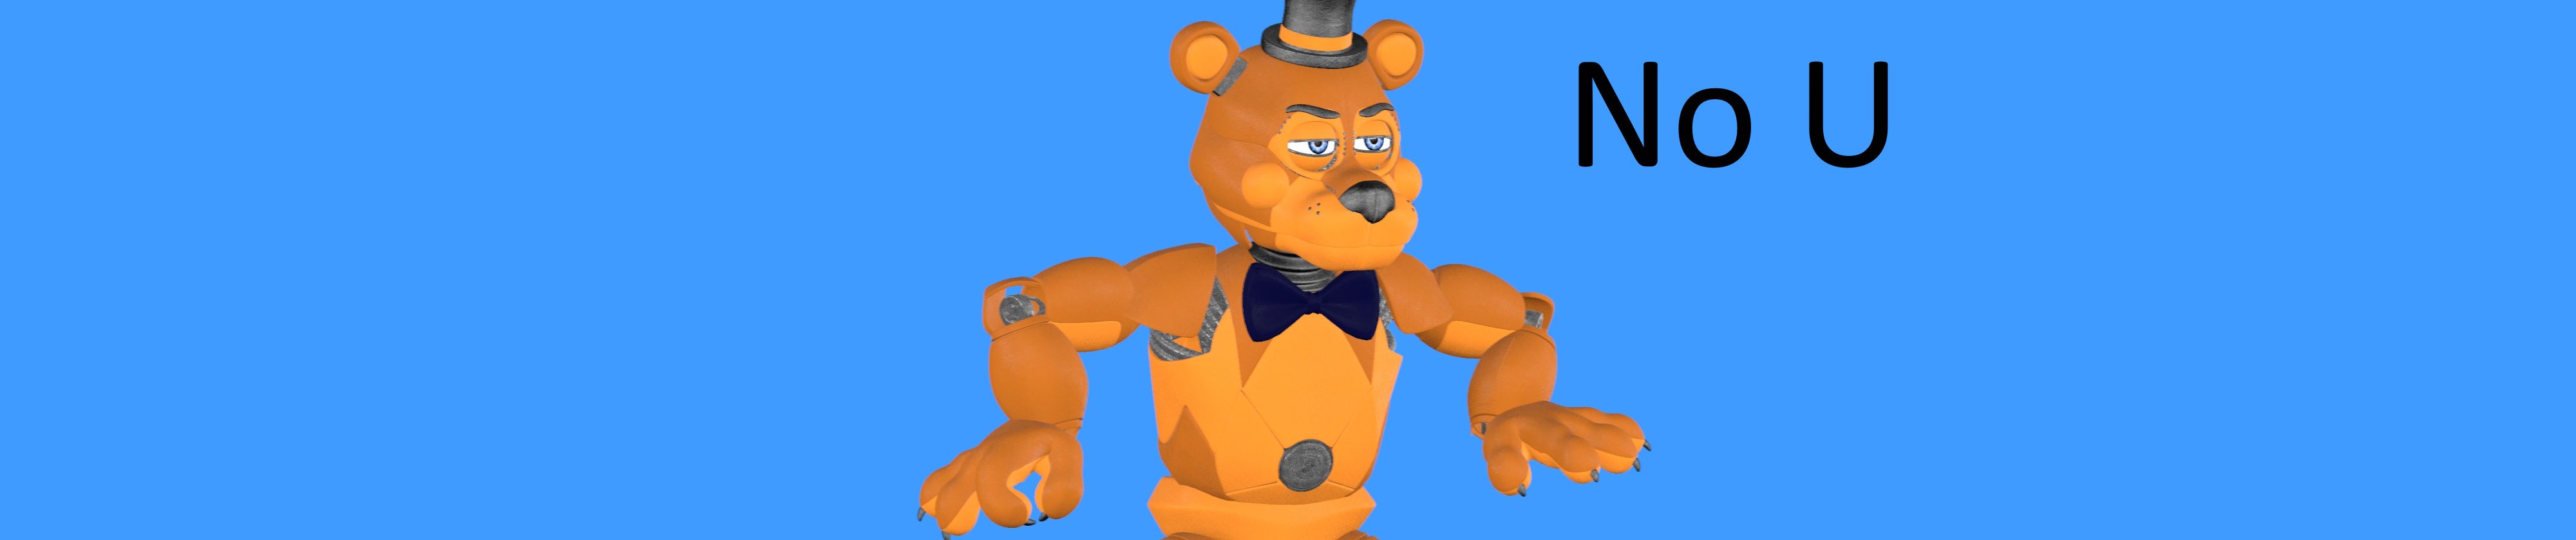 You're My Superstar  Five Nights at Freddy's: Security Breach